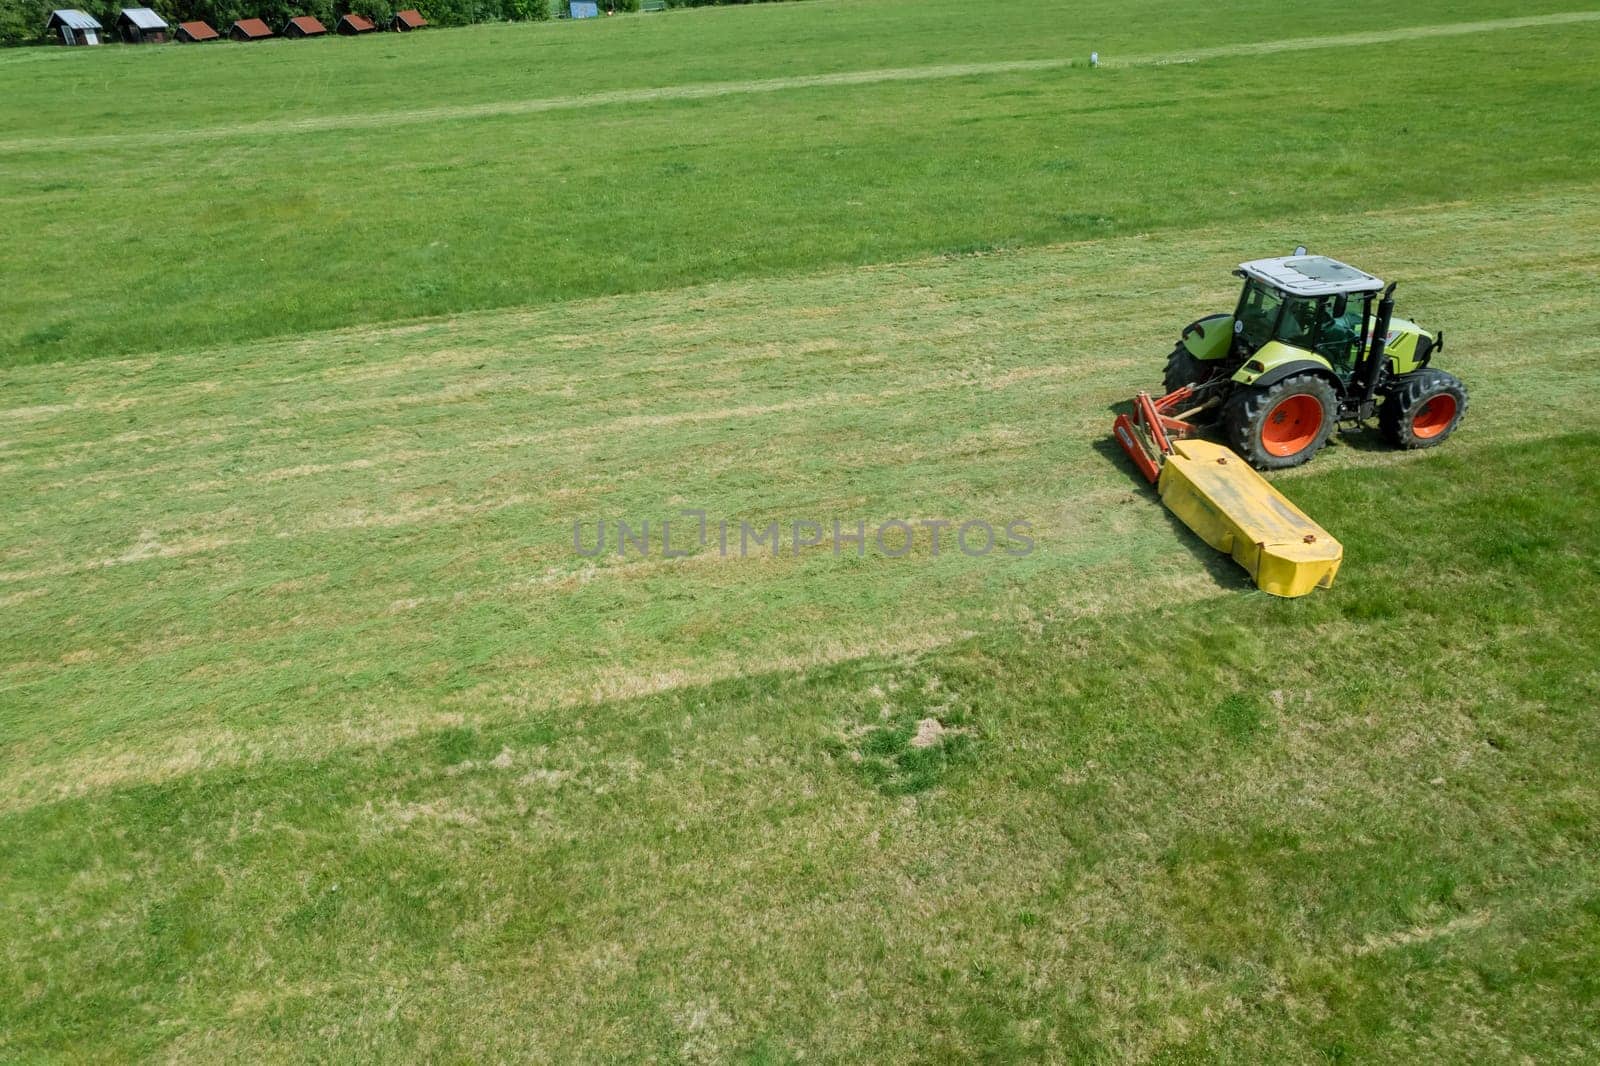 Field is being neatly mowed by the tractor's rotary cutter. Rotary mower attached to tractor is responsible for cutting grass.